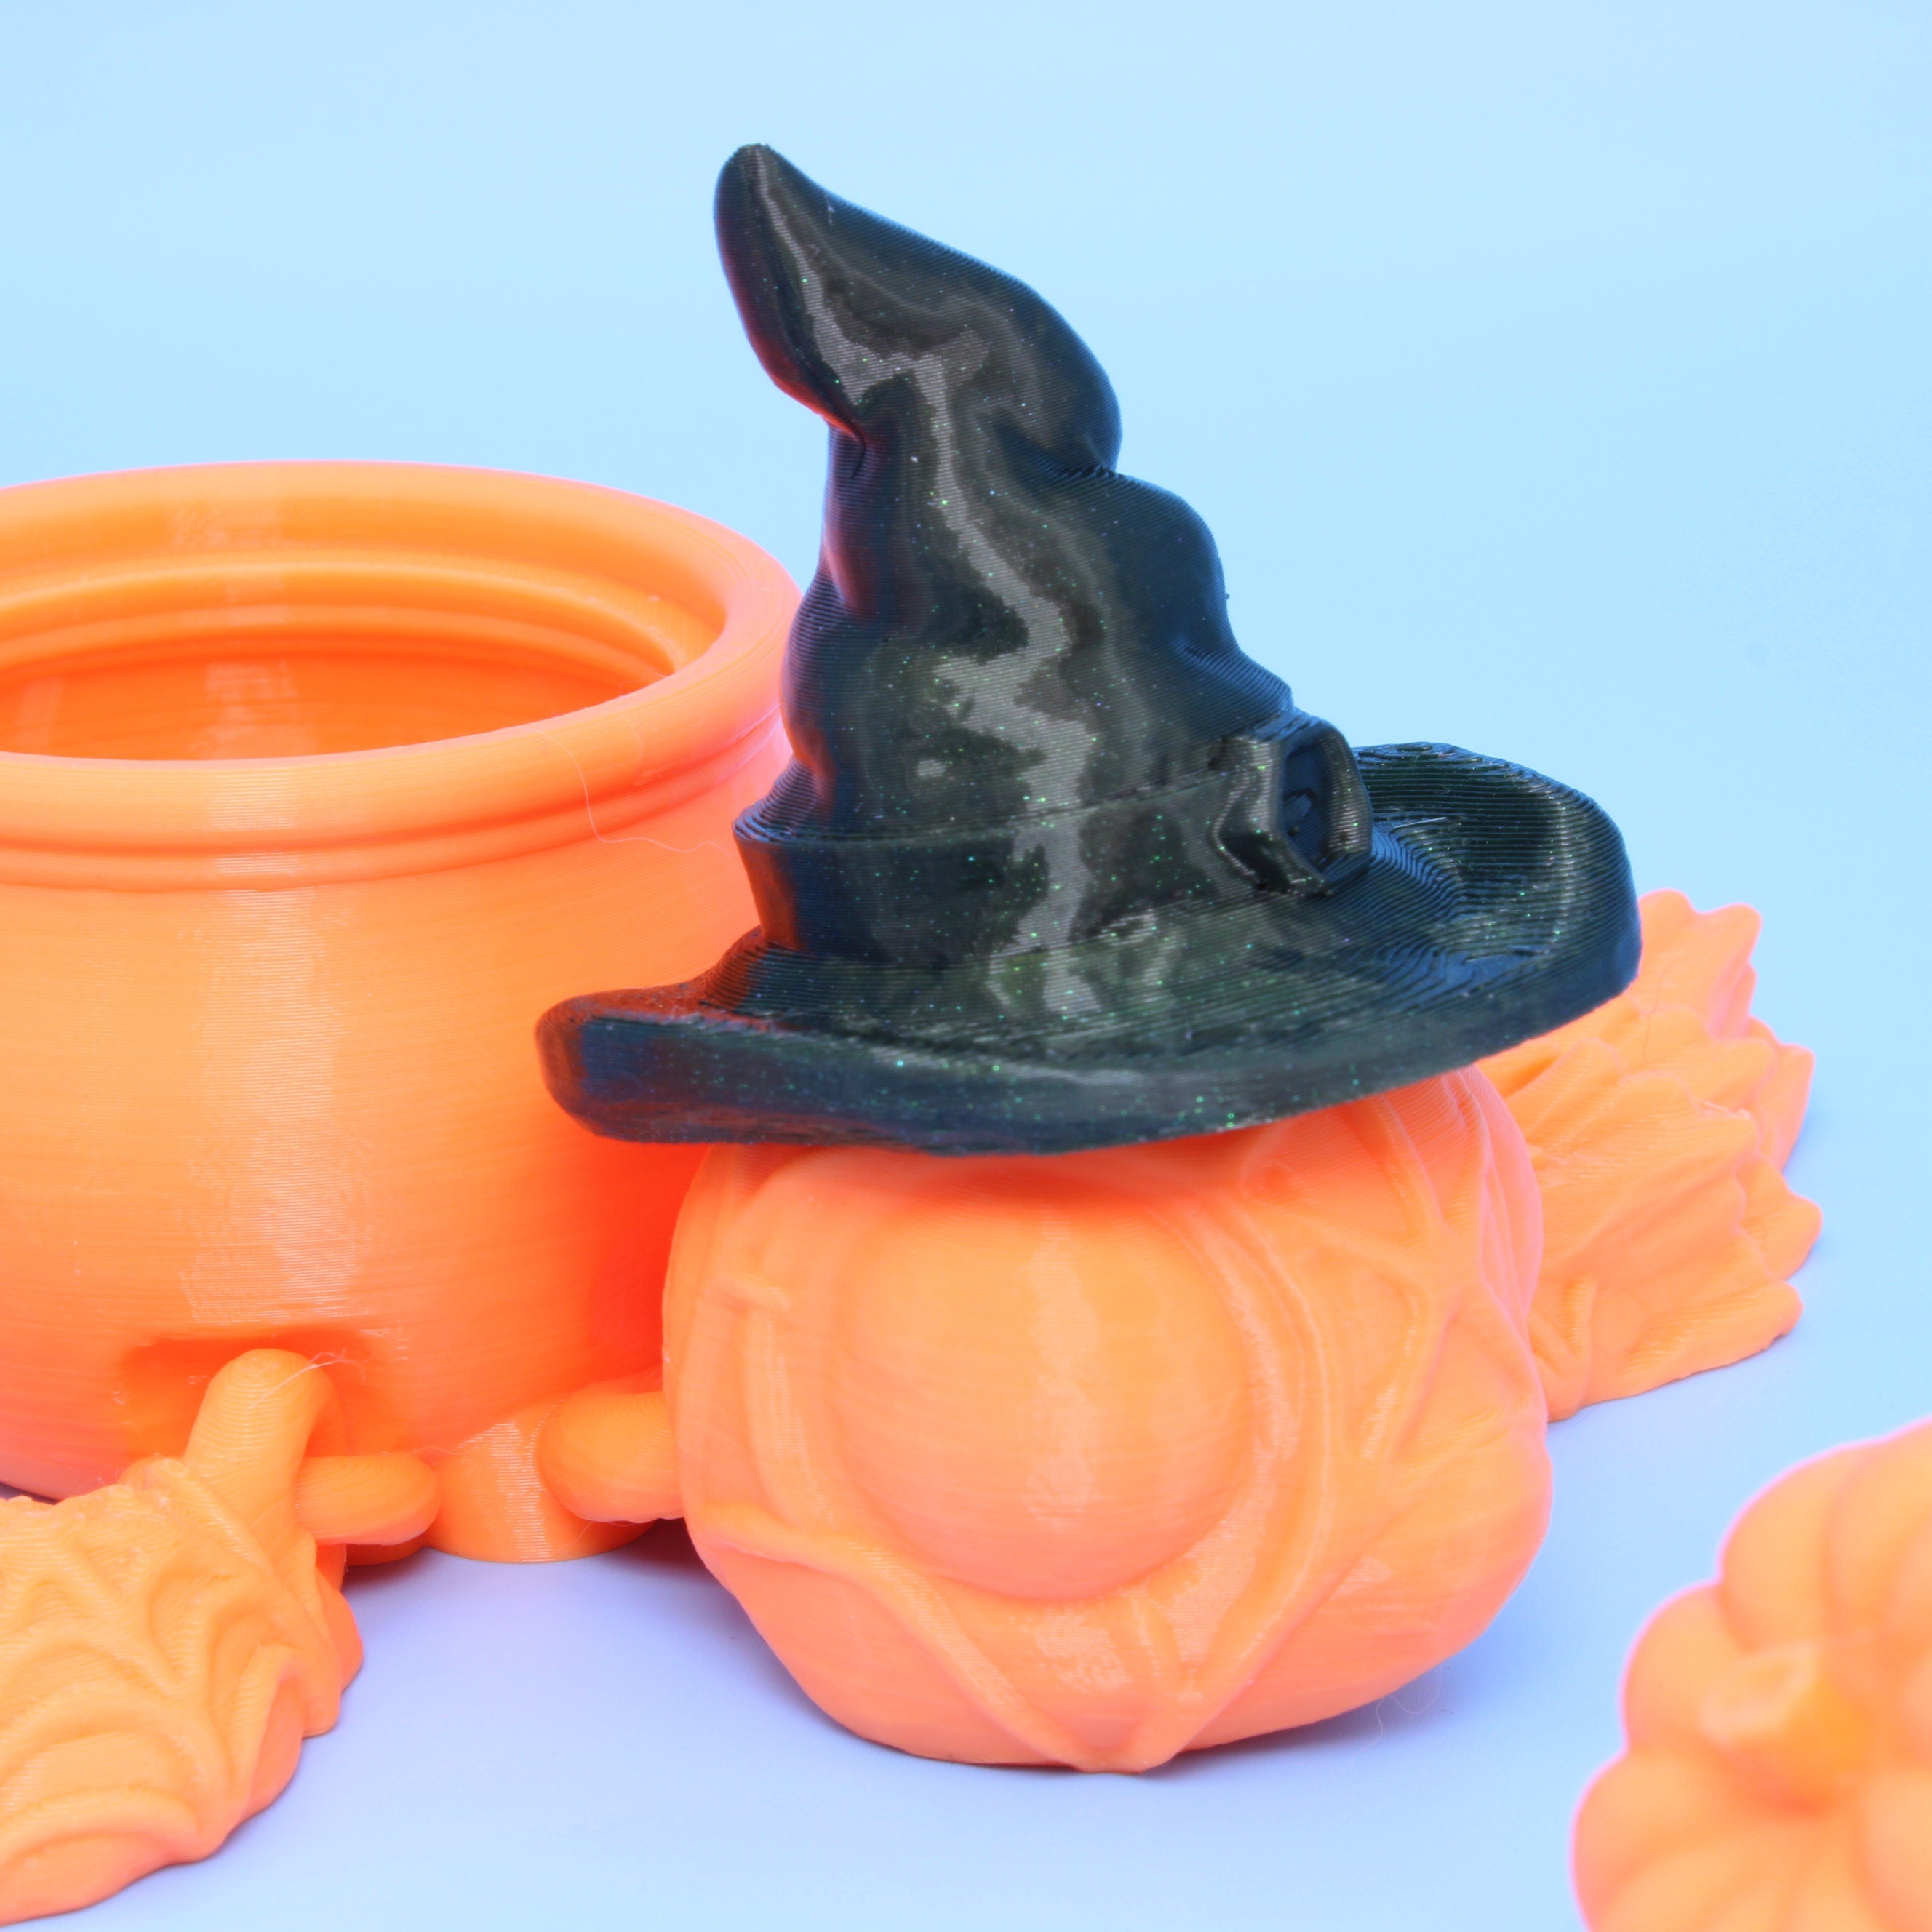 Witchurtle! Spooky time! Witch turtle mix. Mini Halloween candy / treat dish. Adoptable turtle buddy.